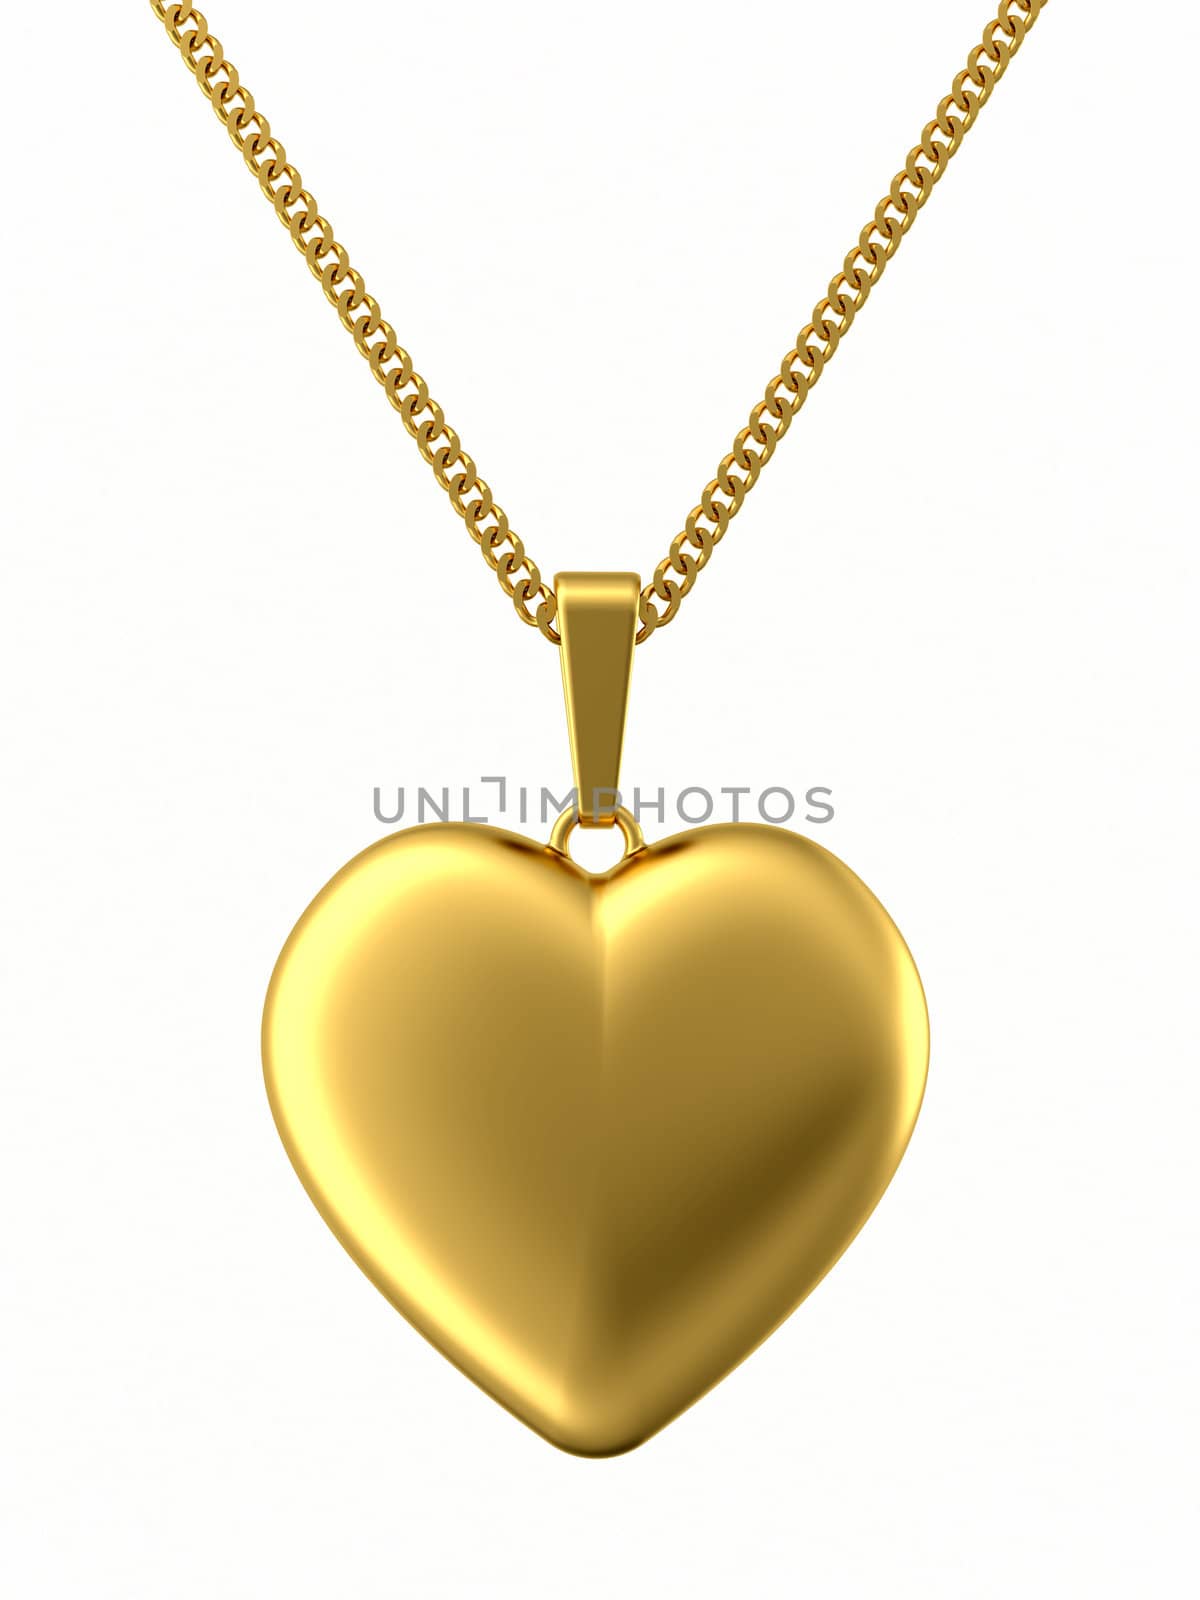 Golden pendant in shape of heart on chain by oneo